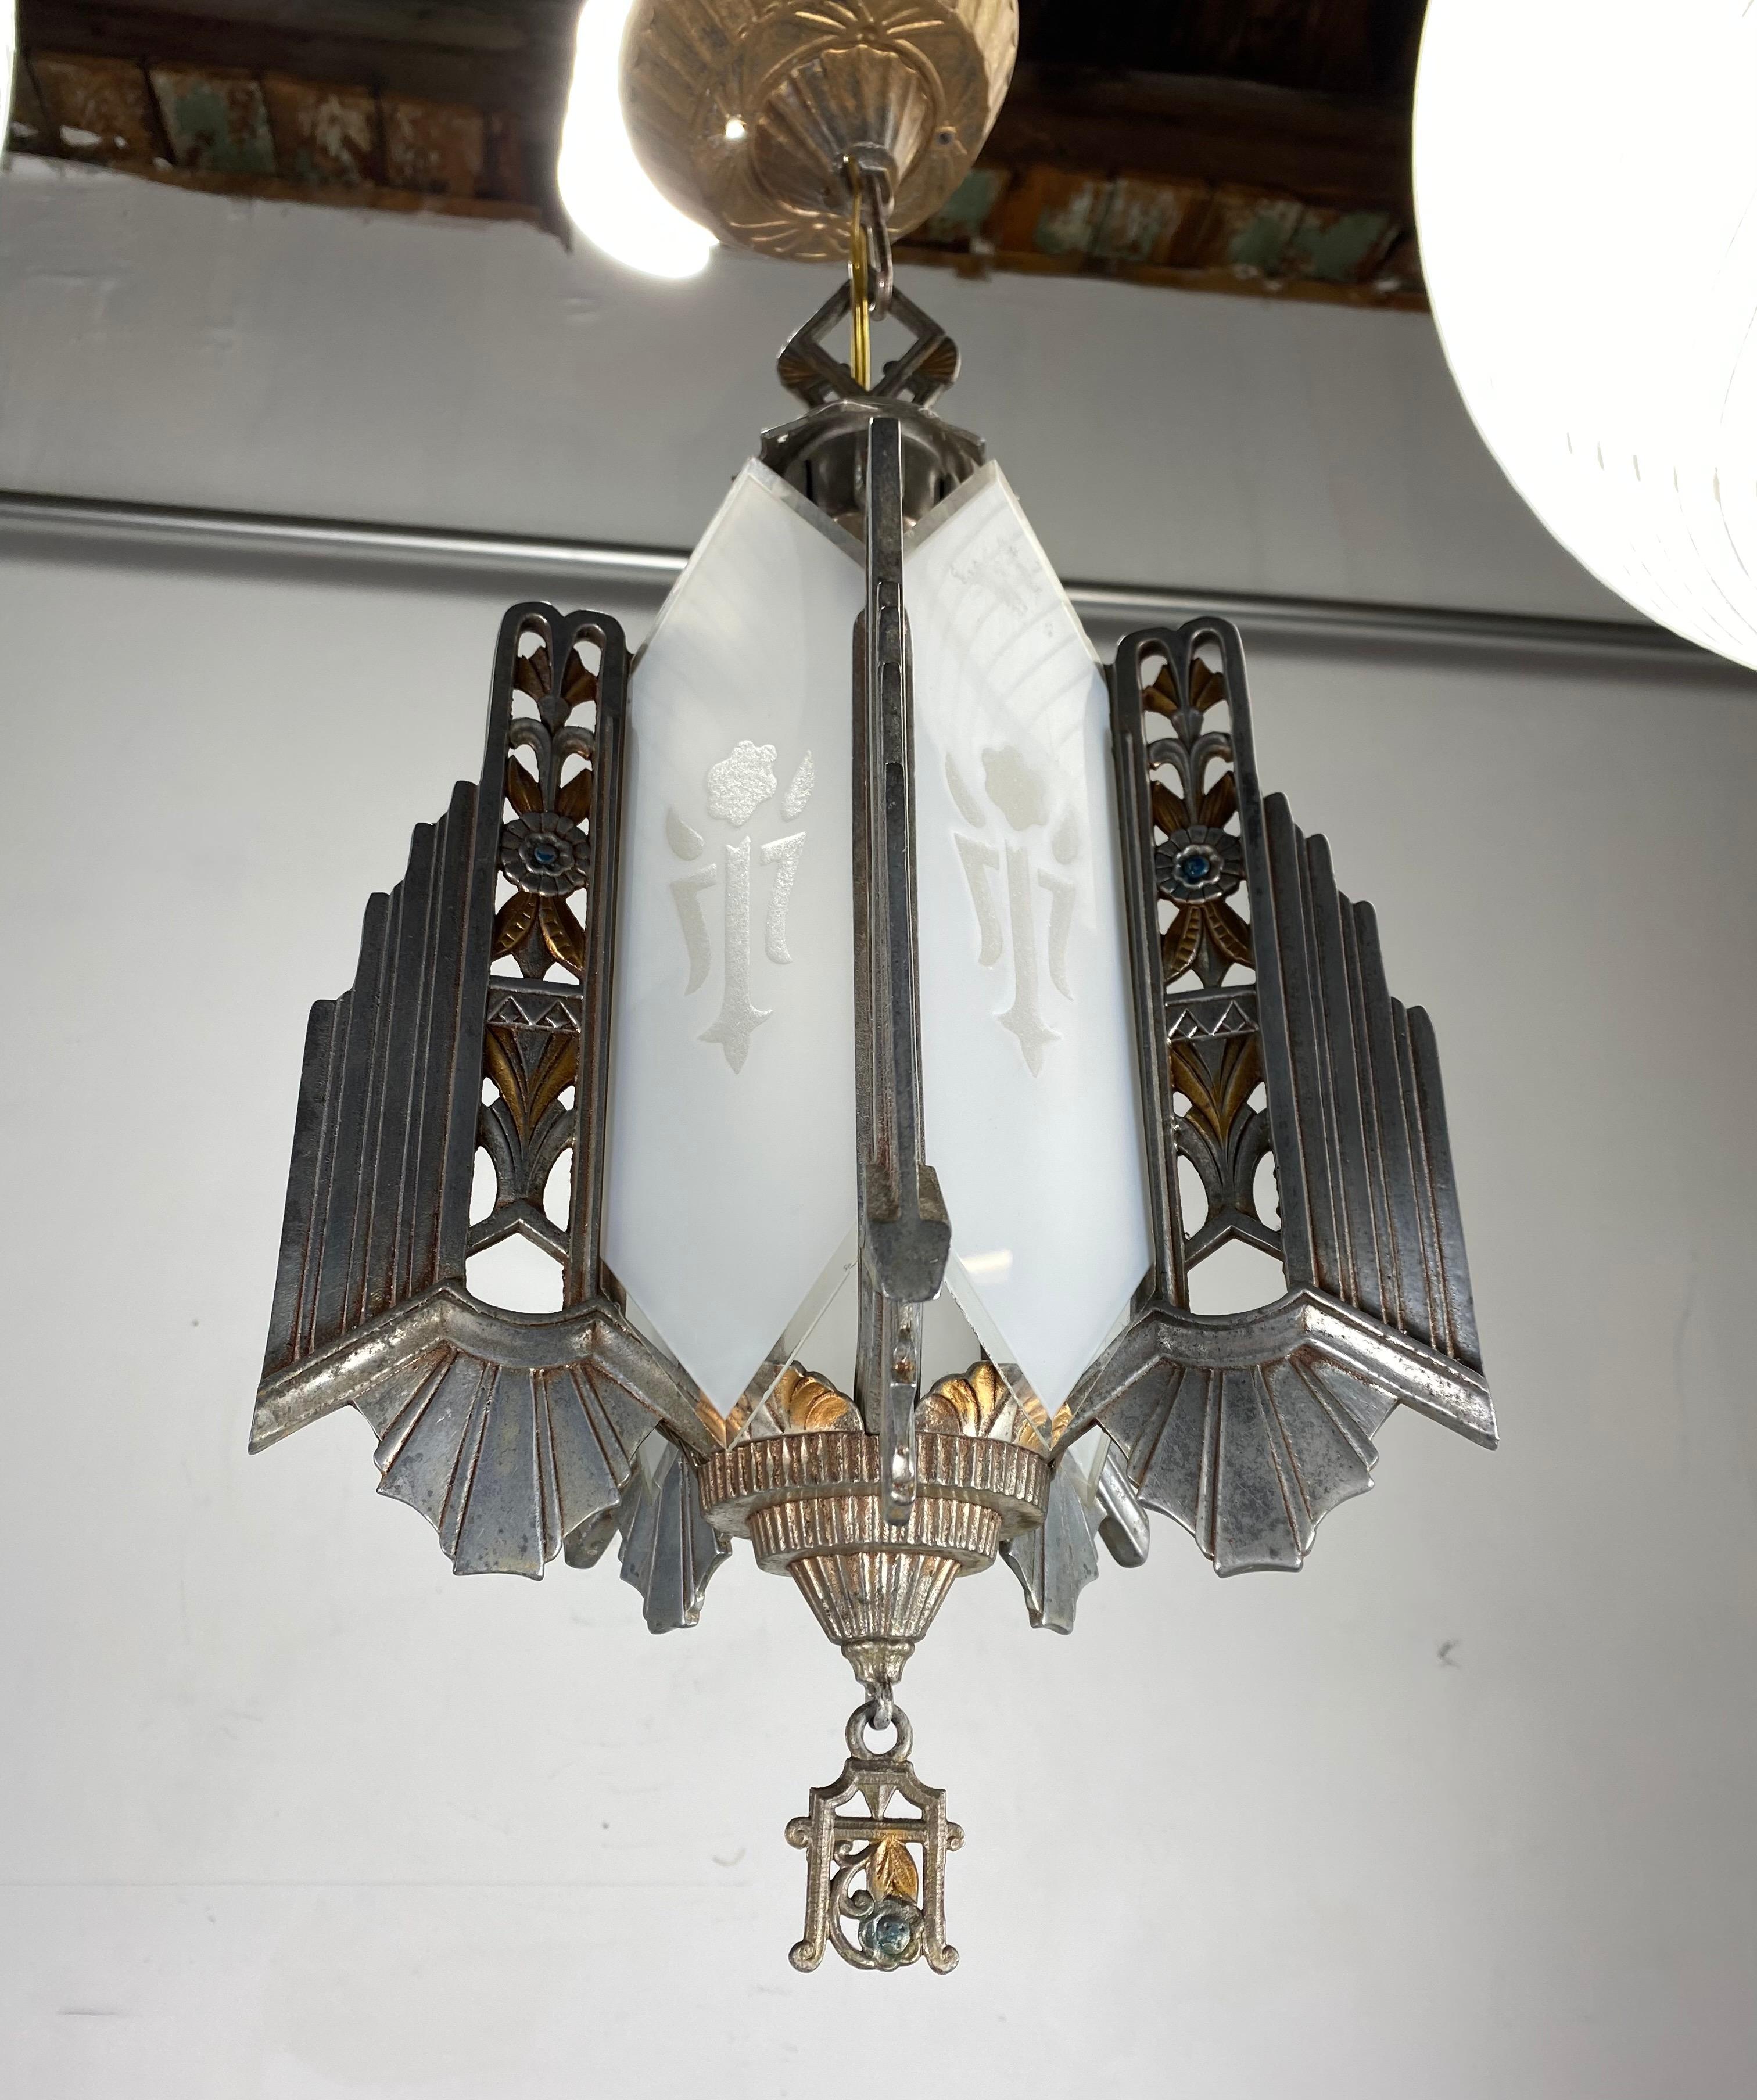 Stylized 1930s metal and glass Art Deco hanging pendant chandelier by Markel, retains original frosted and etched glass panels as well as canopy and finial, wonderful decorative metal work, stunning New York City Deco design.